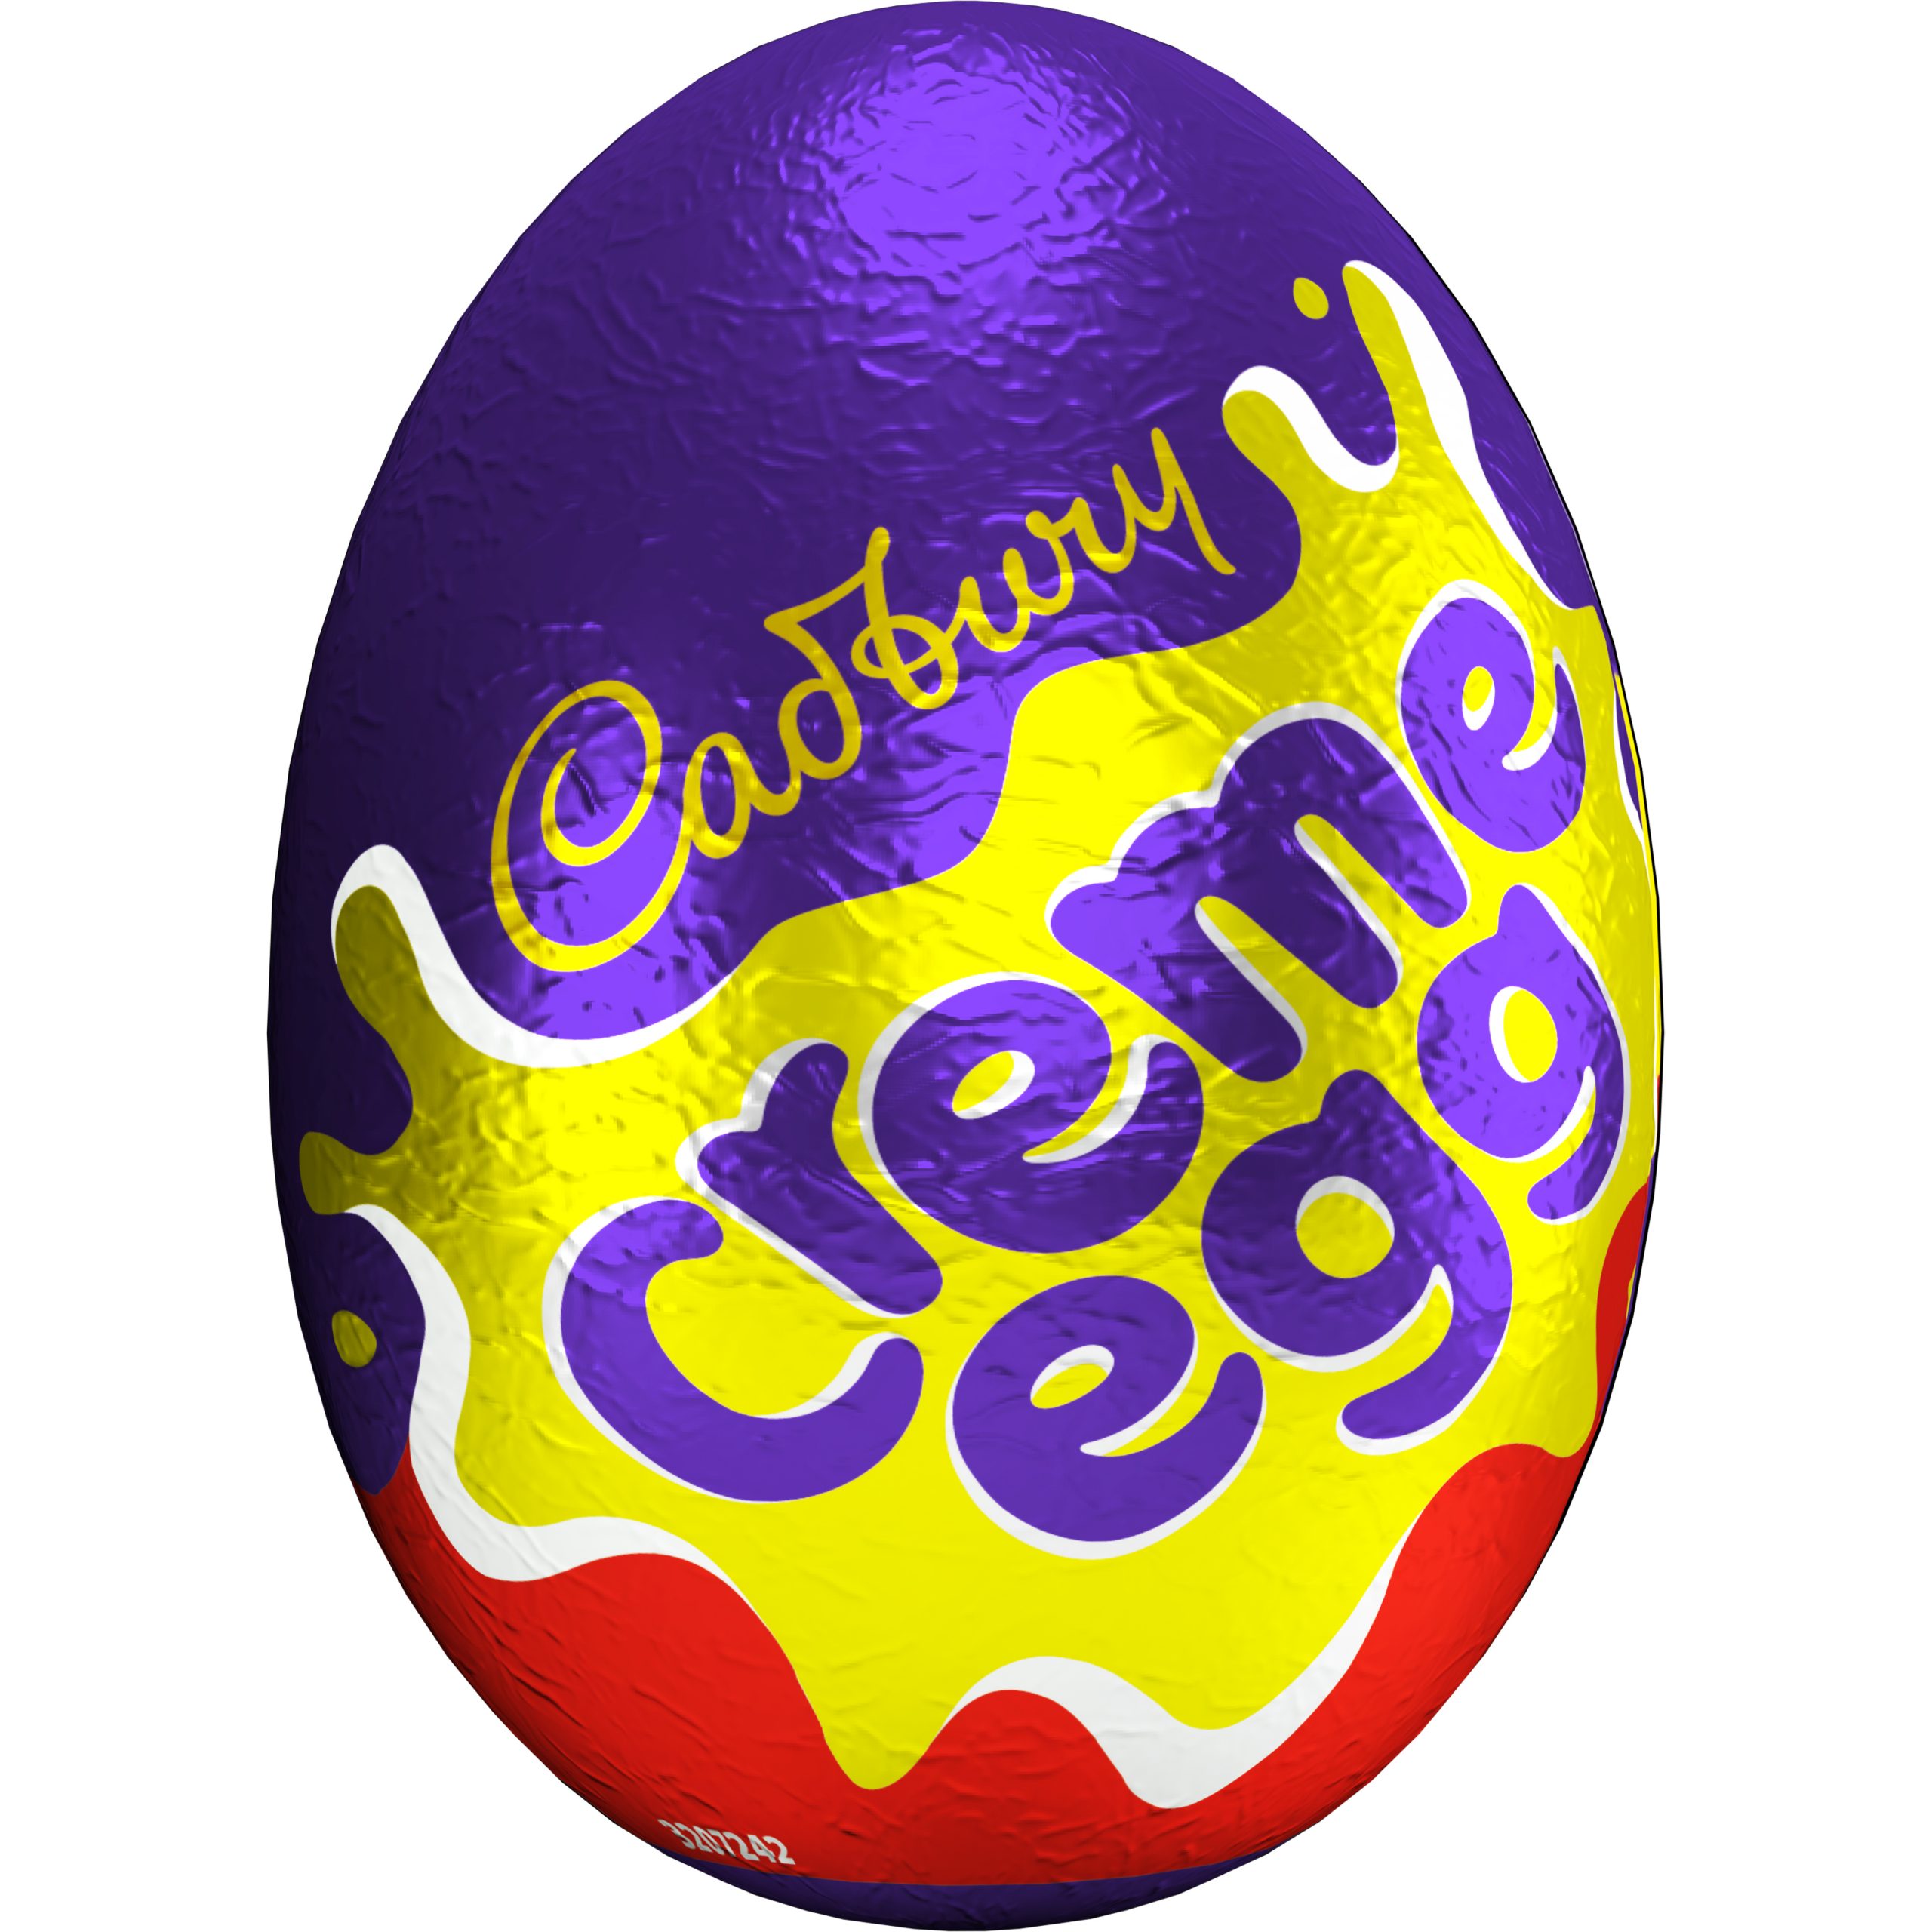 Cadbury Creme Egg ‘How Do You Not Eat Yours?’ campaign returns for 2023